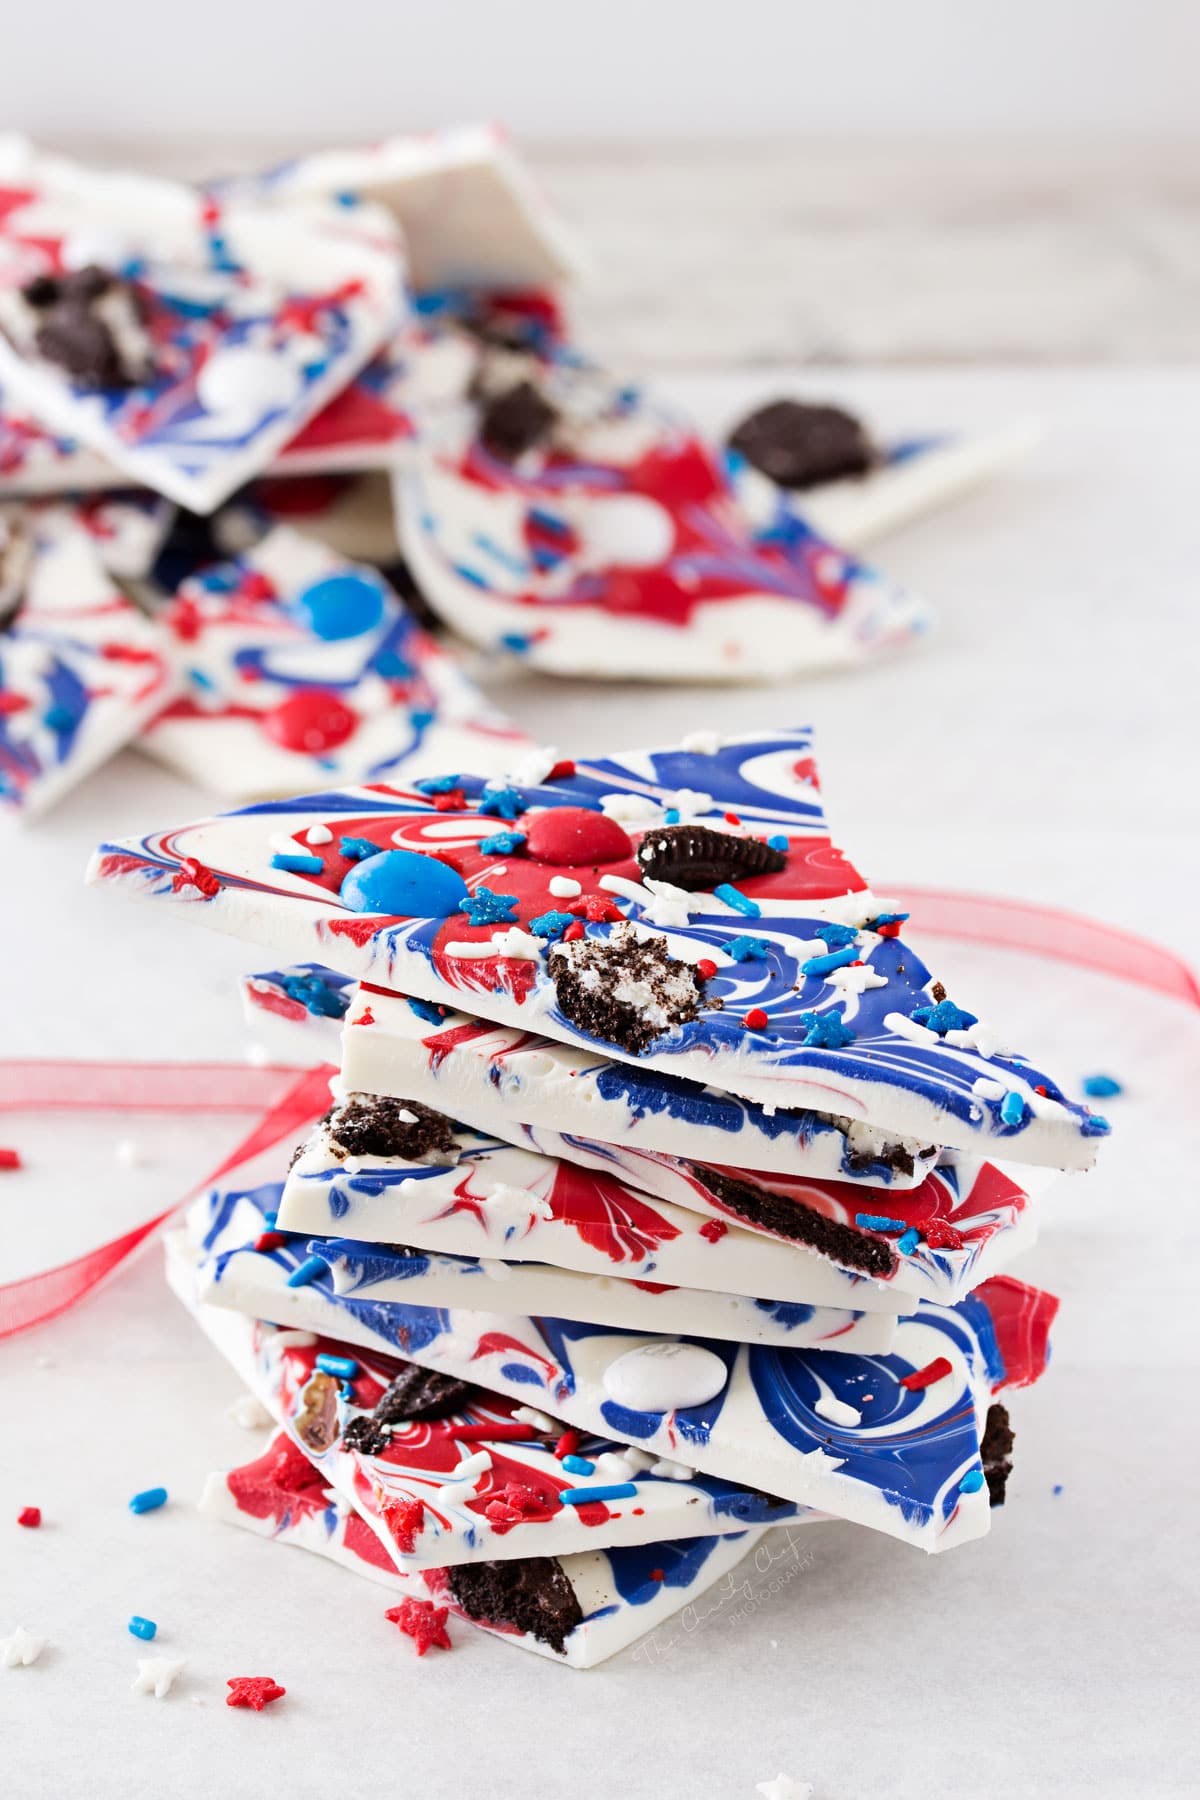 Festive Red White and Blue Bark | This simple and fun no-bake bark recipe is perfect for Memorial Day or Independence Day! So simple, even your kids can make it! | http://thechunkychef.com